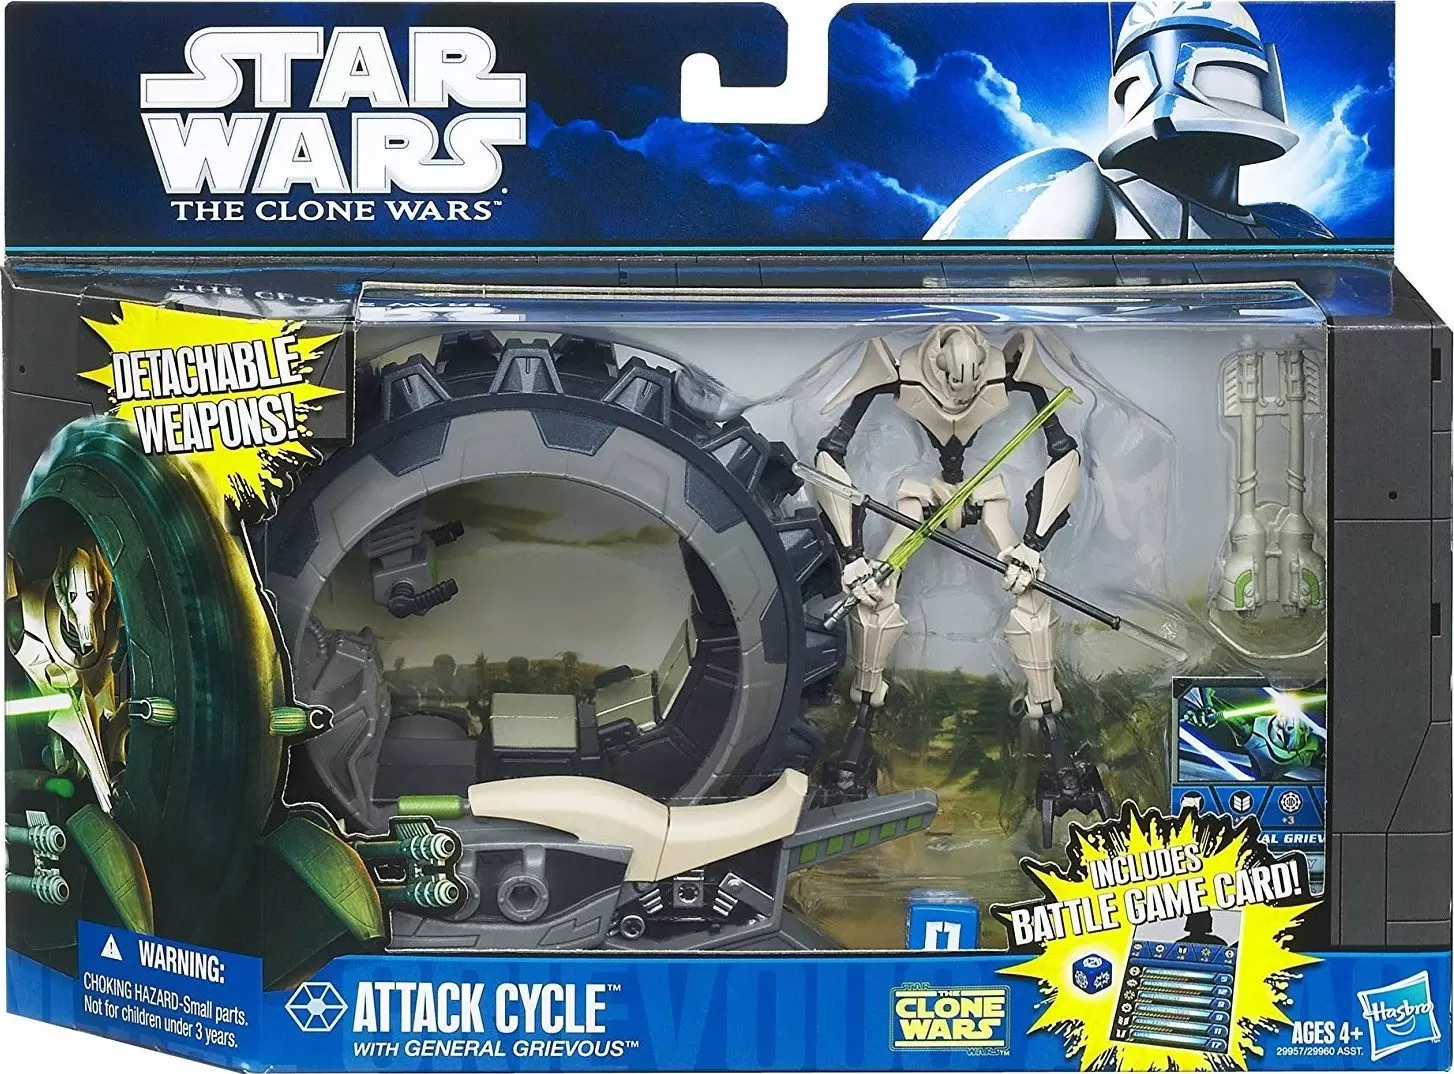 The Clone Wars - Shadow of the Dark Side - ATTACK CYCLE with General Grievous